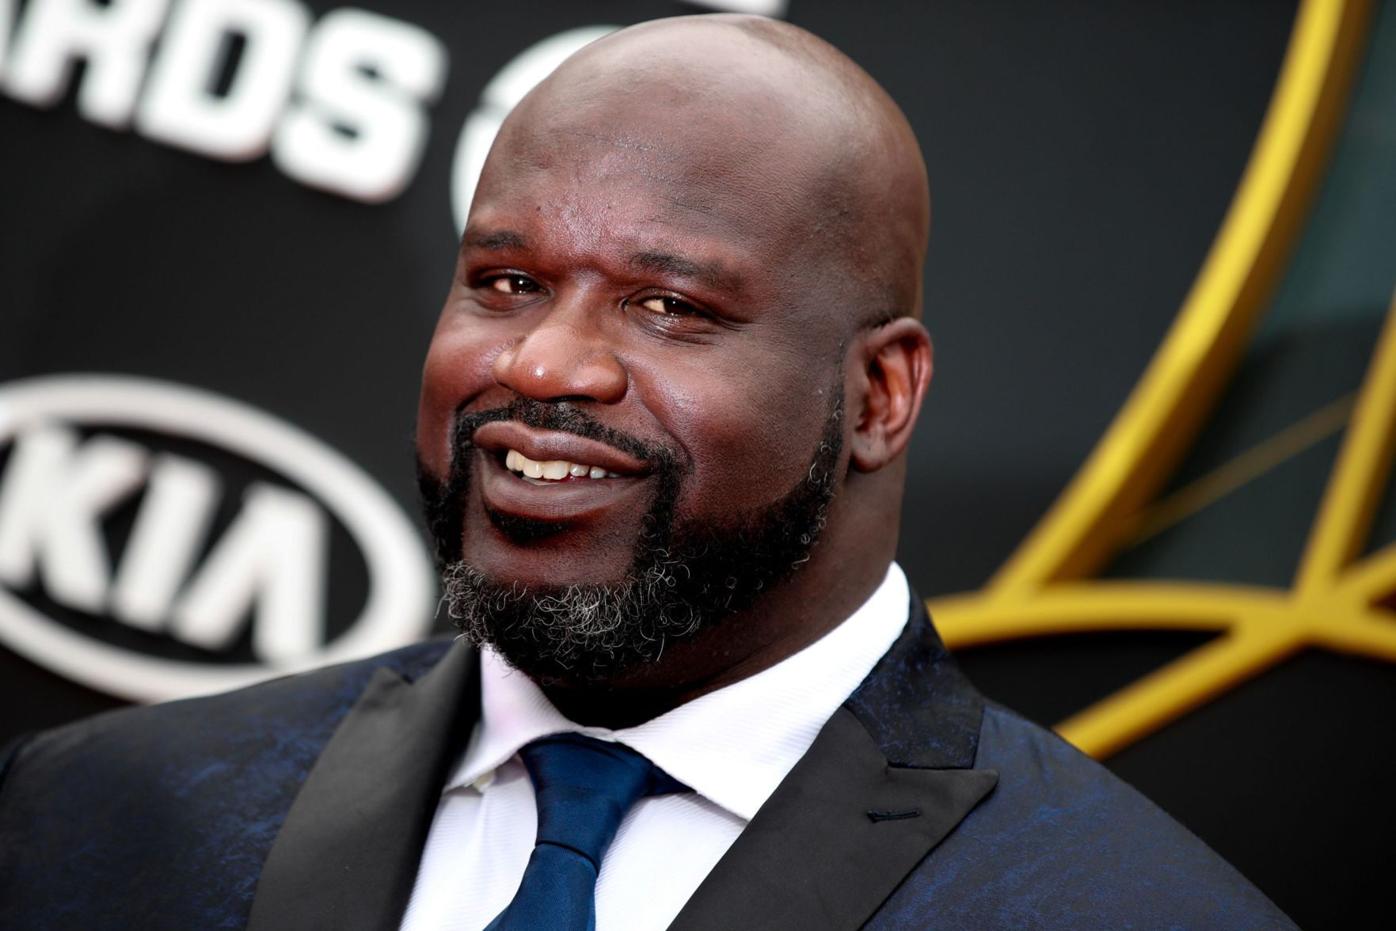 Accused of Using “fake jewels”, Shaquille O'Neal Received a $37,250  Tribute From This $1.048 Billion Watchmaker - The SportsRush